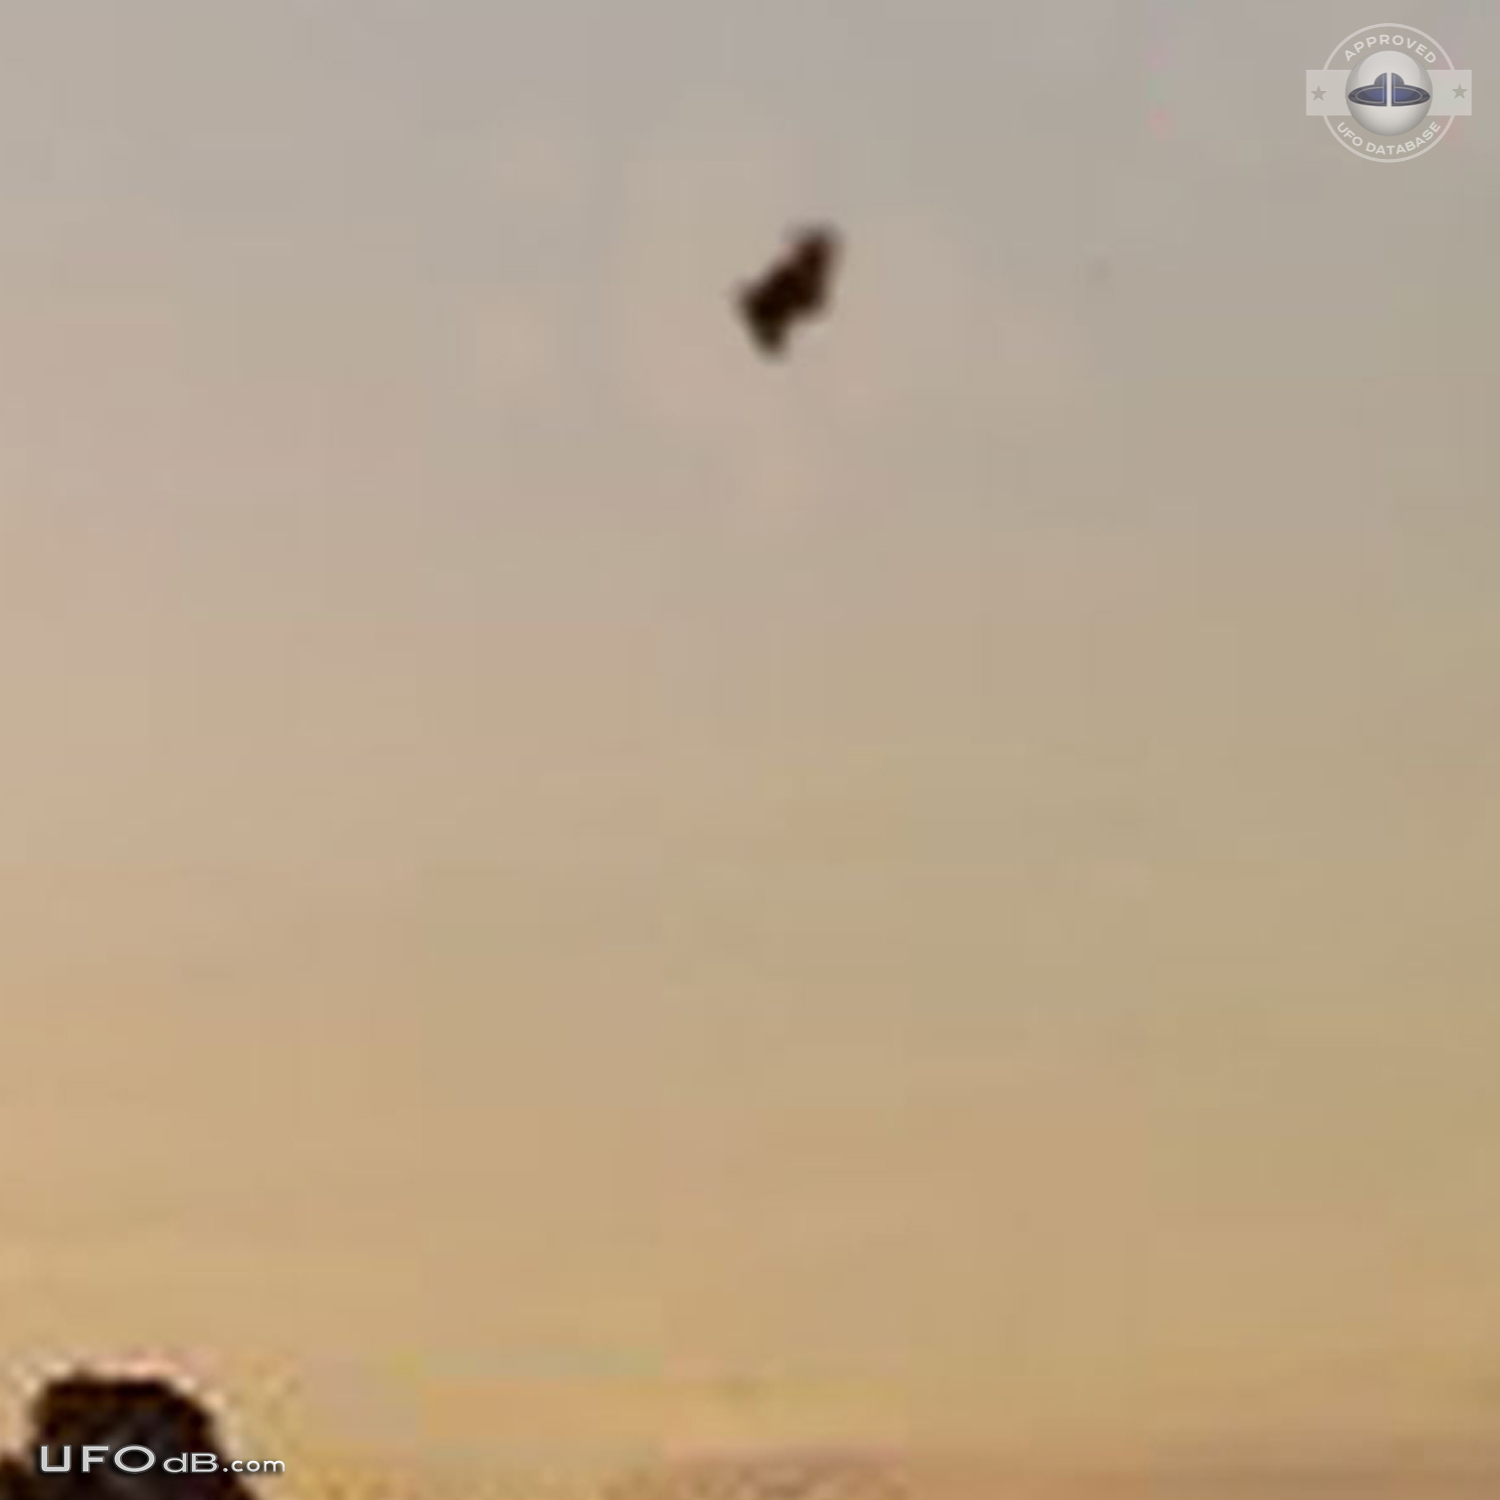 Bright metallic UFO caught on picture over Nasice, Croatia in May 2008 UFO Picture #471-3